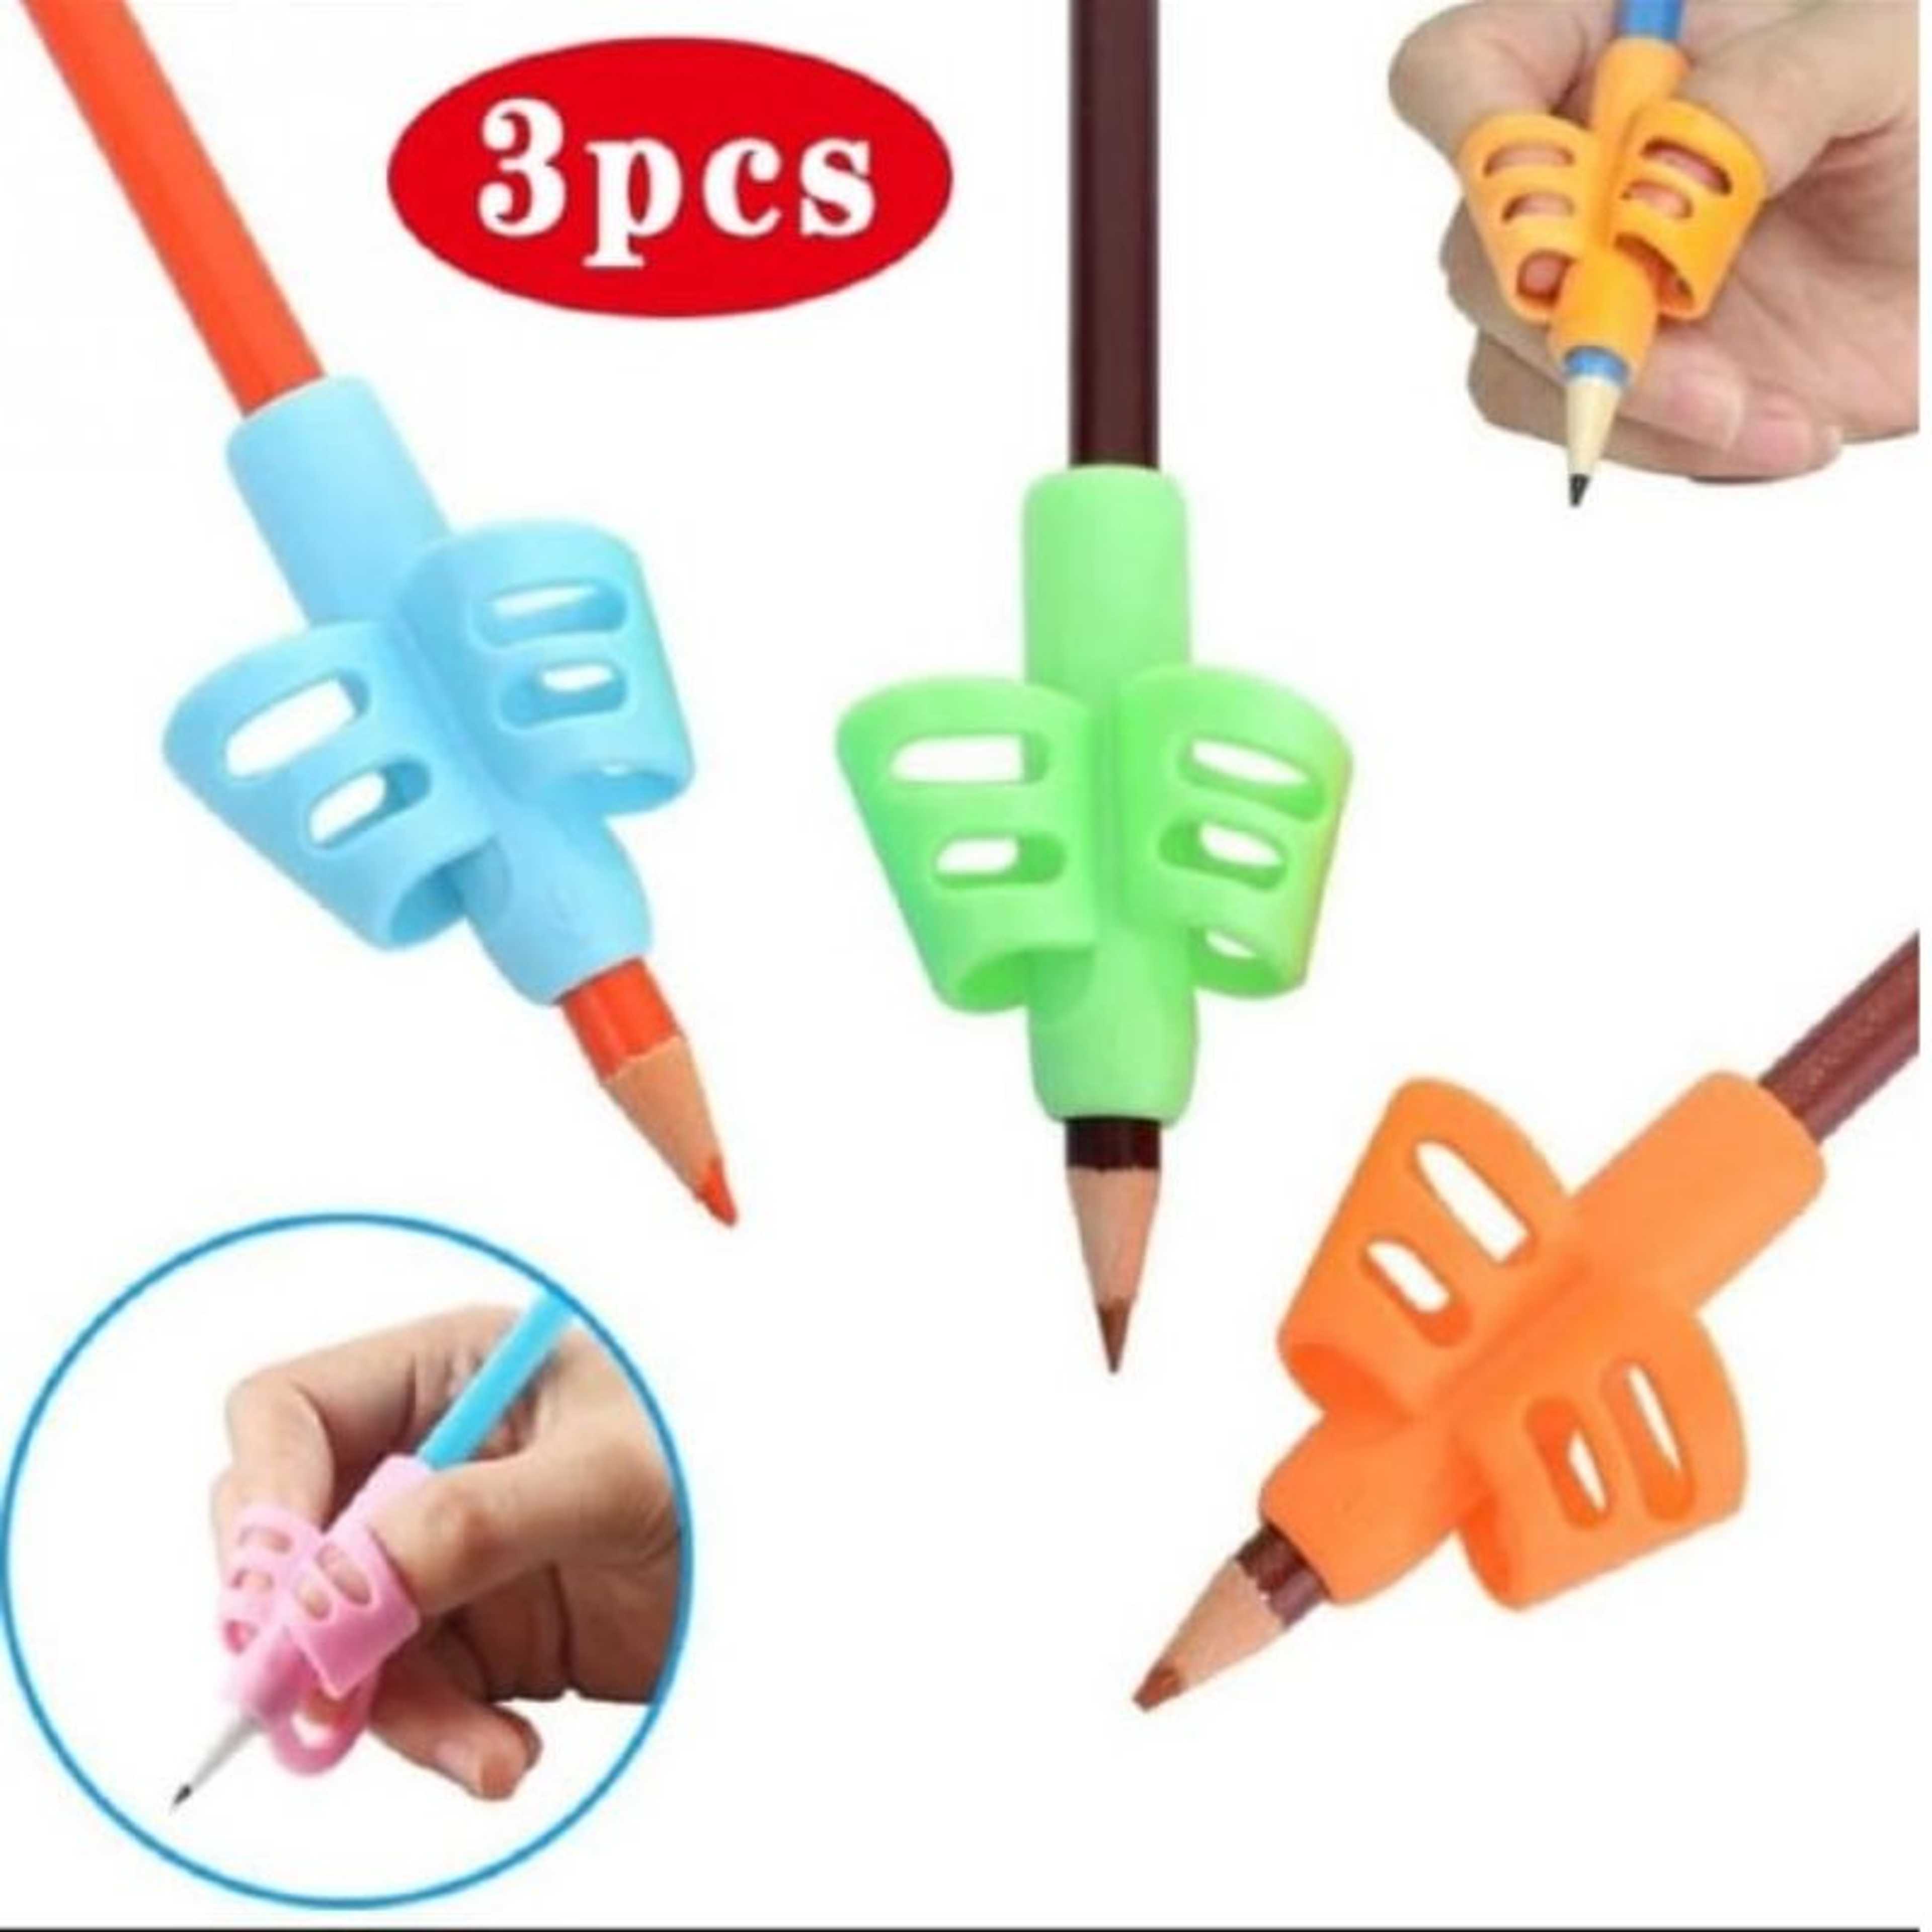 3 Pcs Pencil Grip Two Fingers Pencil Holder Writing Aid Grip Soft Silicone Training Posture Correction Kids